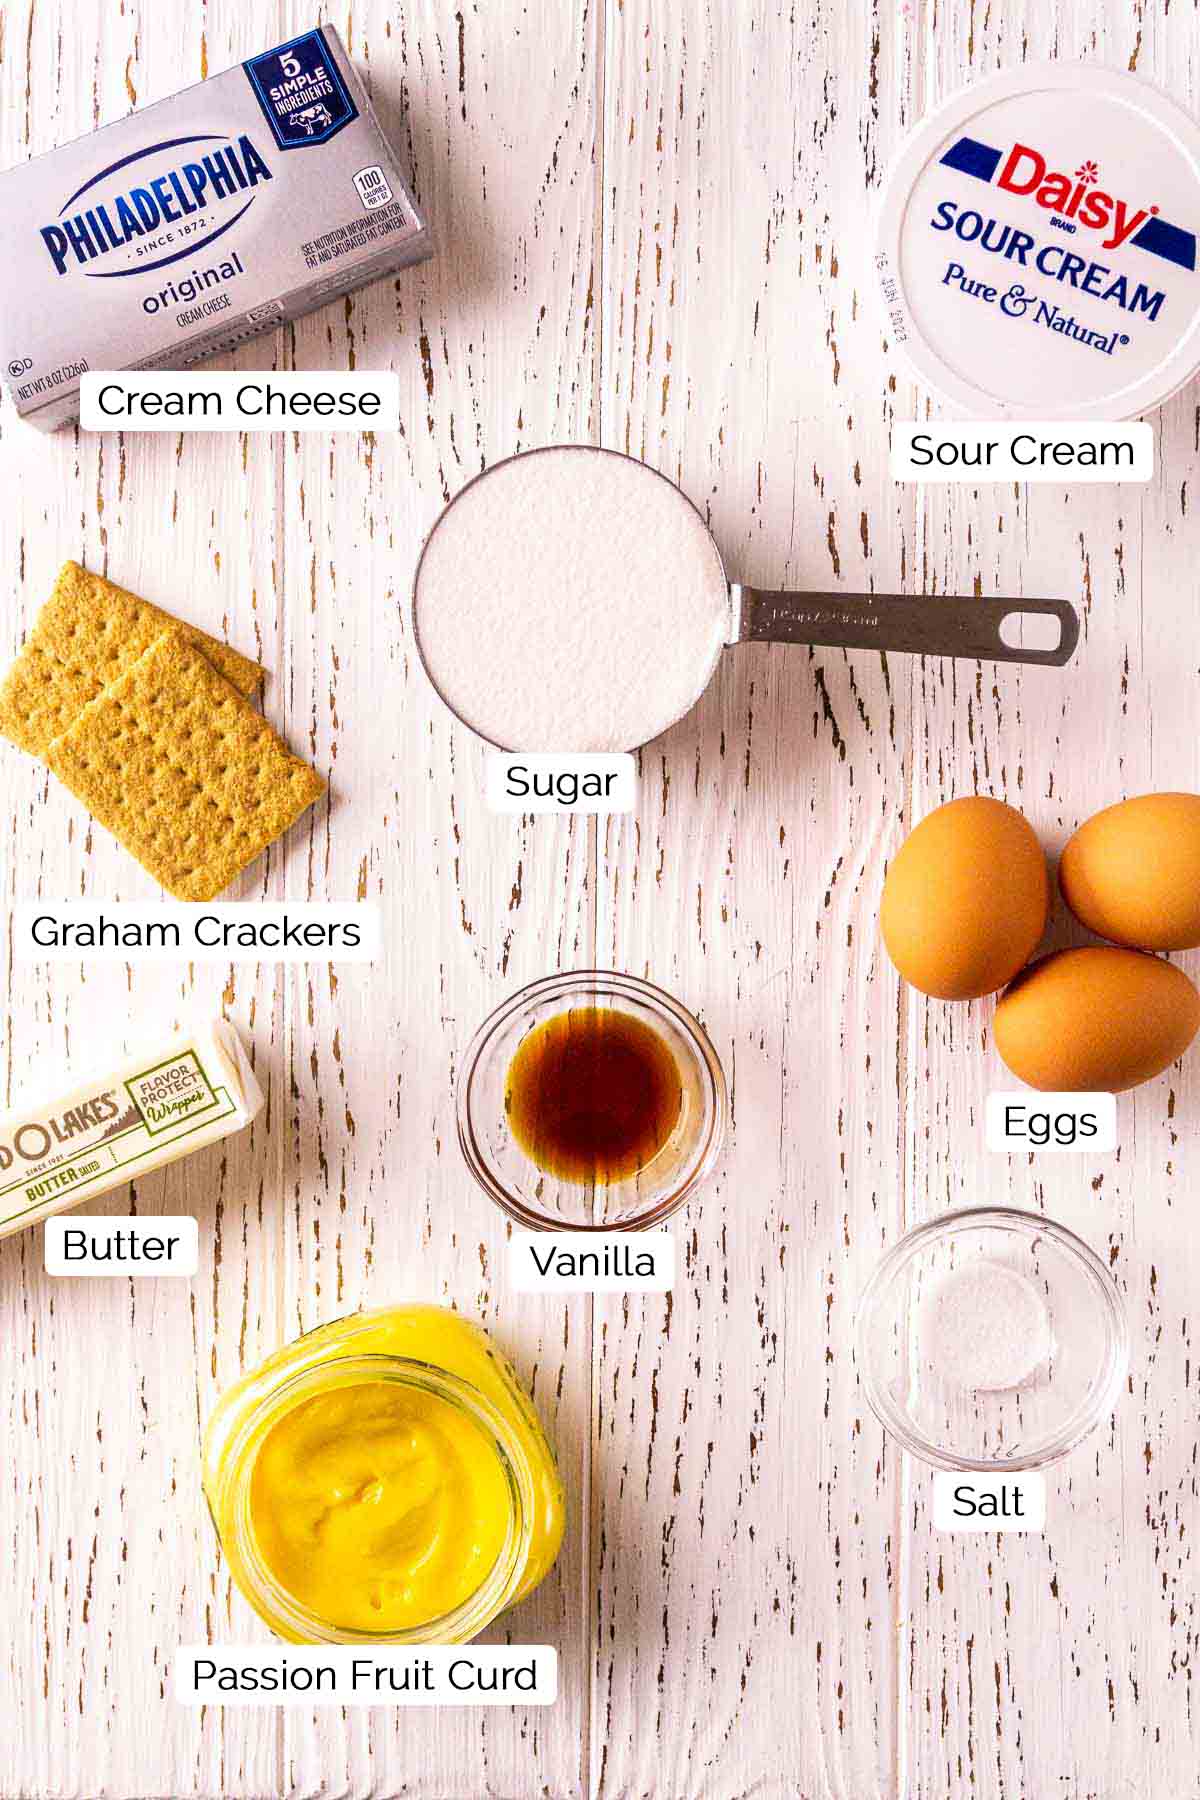 The cheesecake ingredients on a white wooden surface with white and black labels by the items.